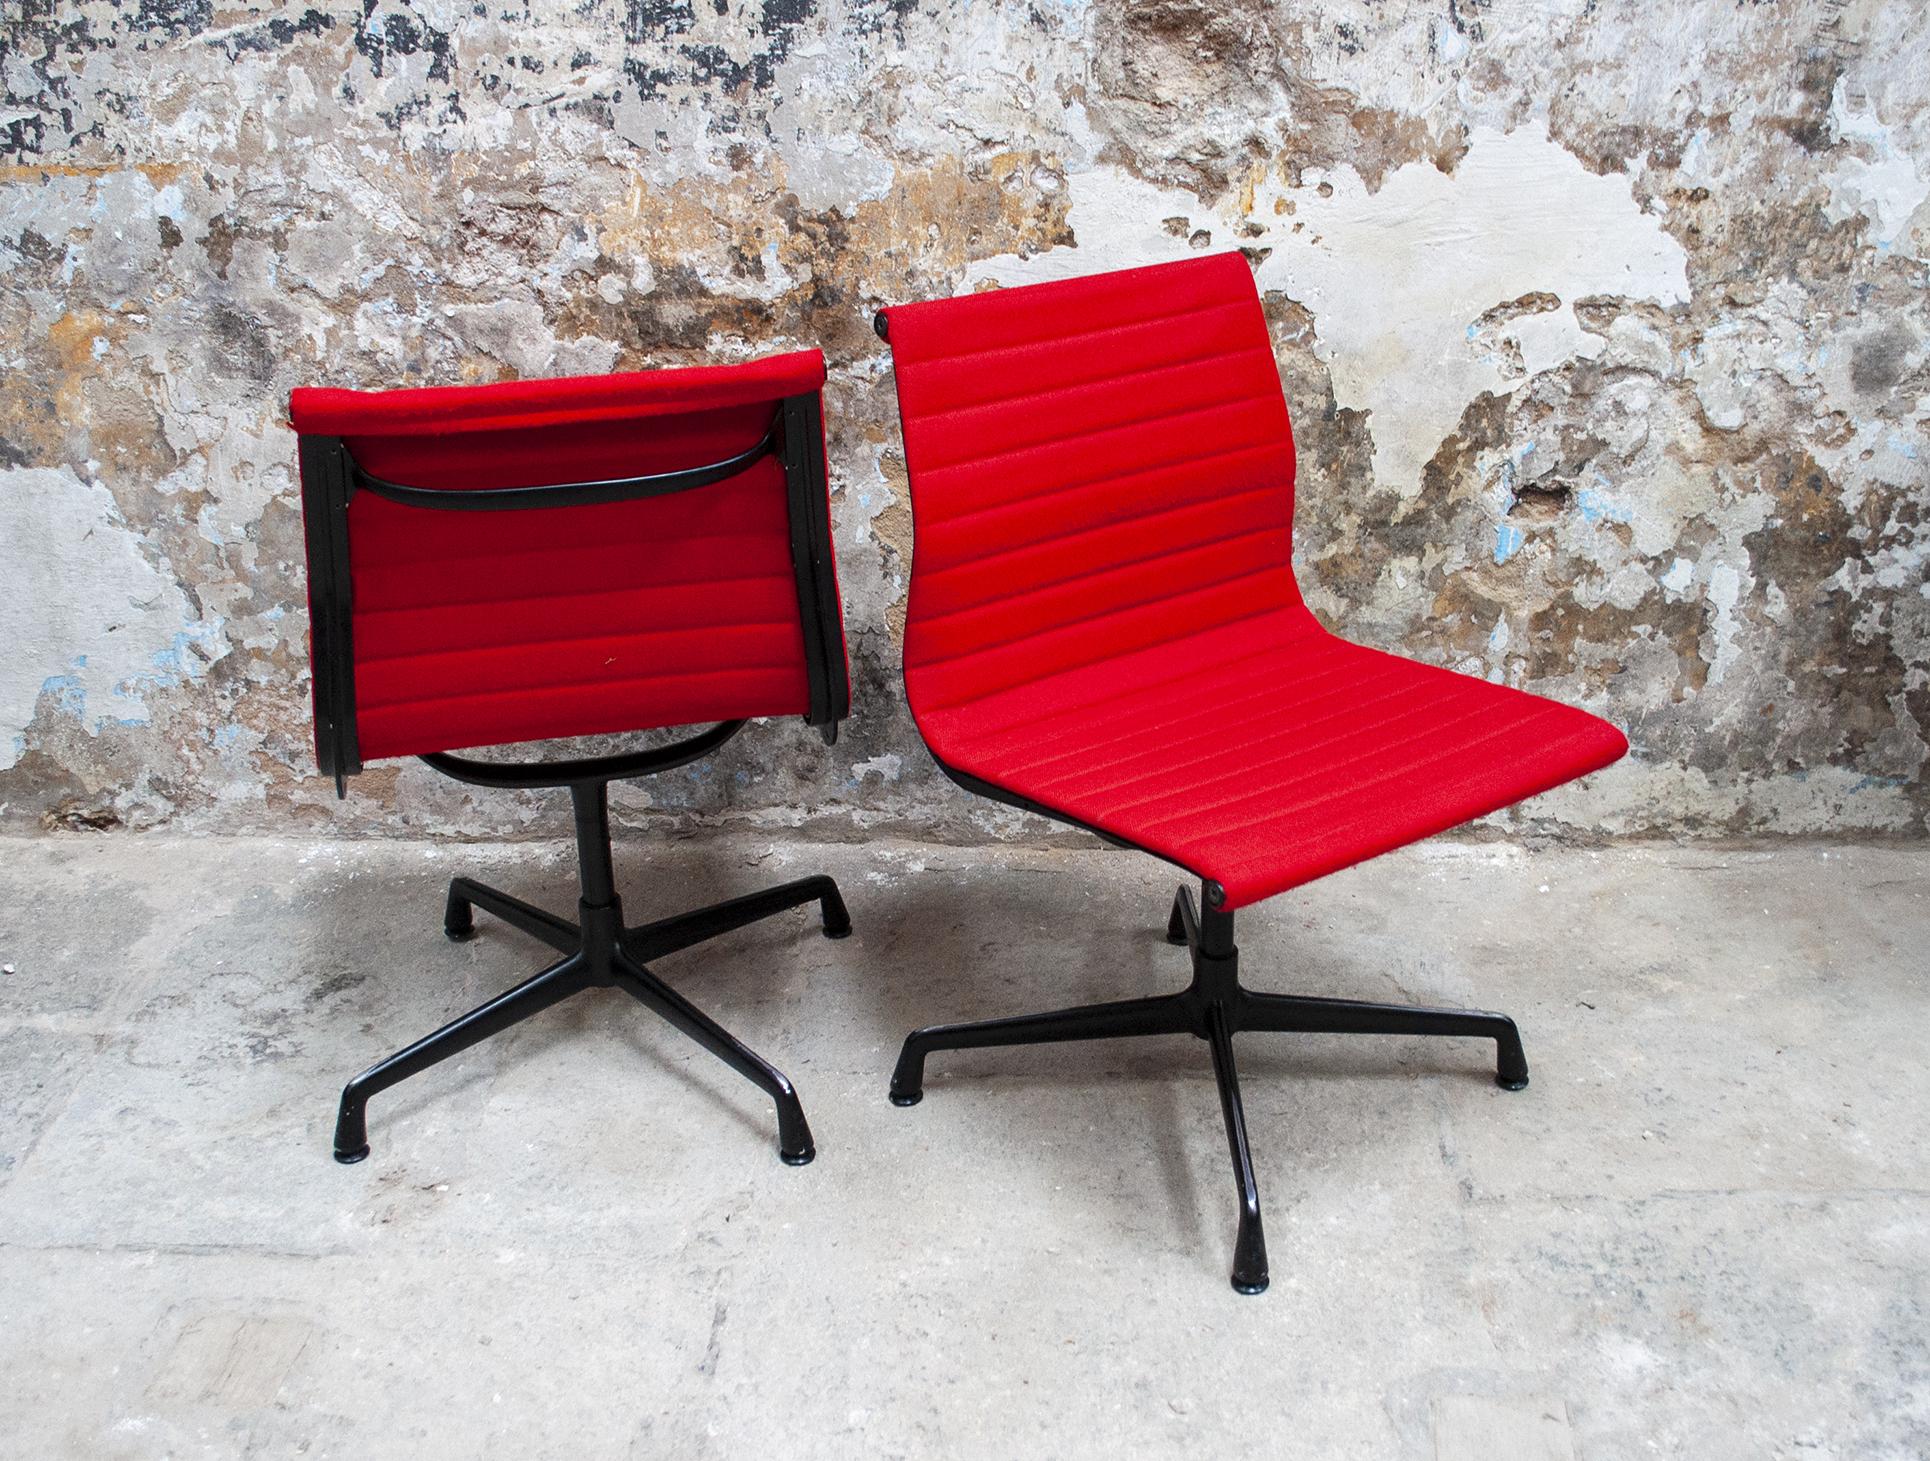 Industrial Pair of Aluminum Chair by Charles & Ray Eames for Herman Miller, 1980s For Sale